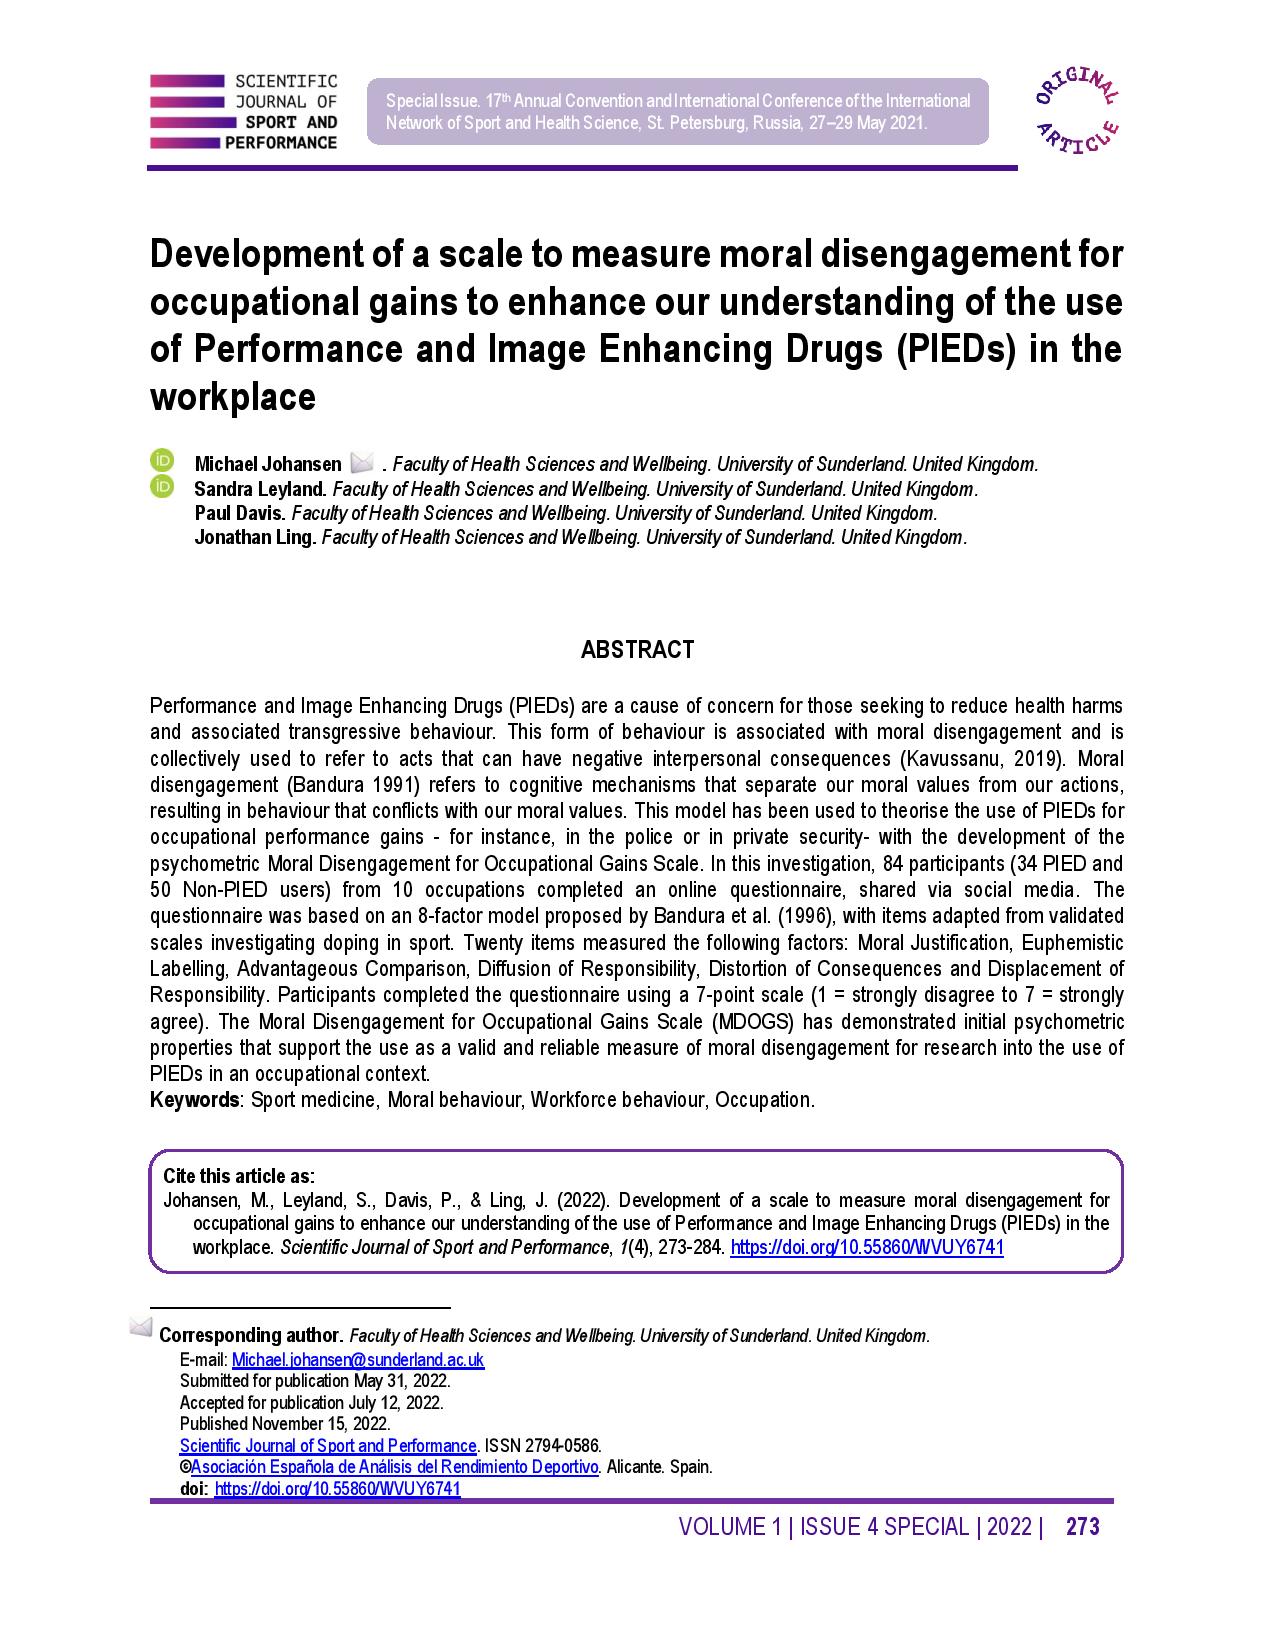 Development of a scale to measure moral disengagement for occupational gains to enhance our understanding of the use of Performance and Image Enhancing Drugs (PIEDs) in the workplace